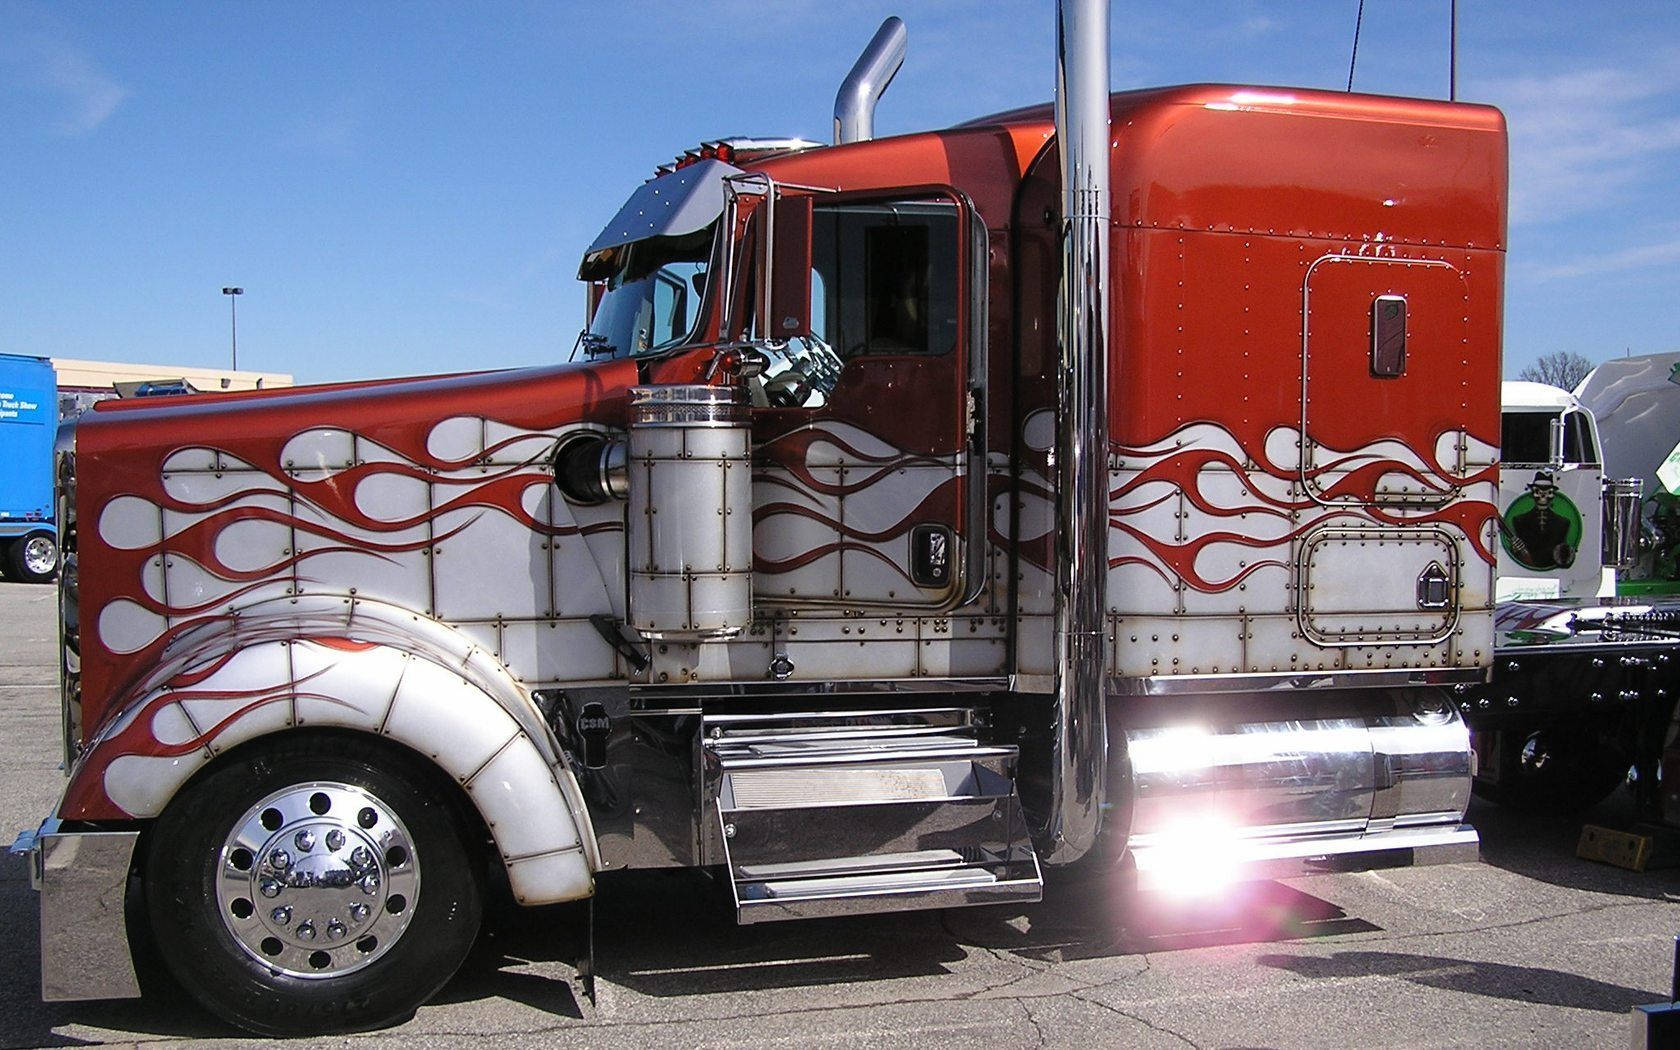 Caption: Bold Red Kenworth Truck in its Flame Design Wallpaper